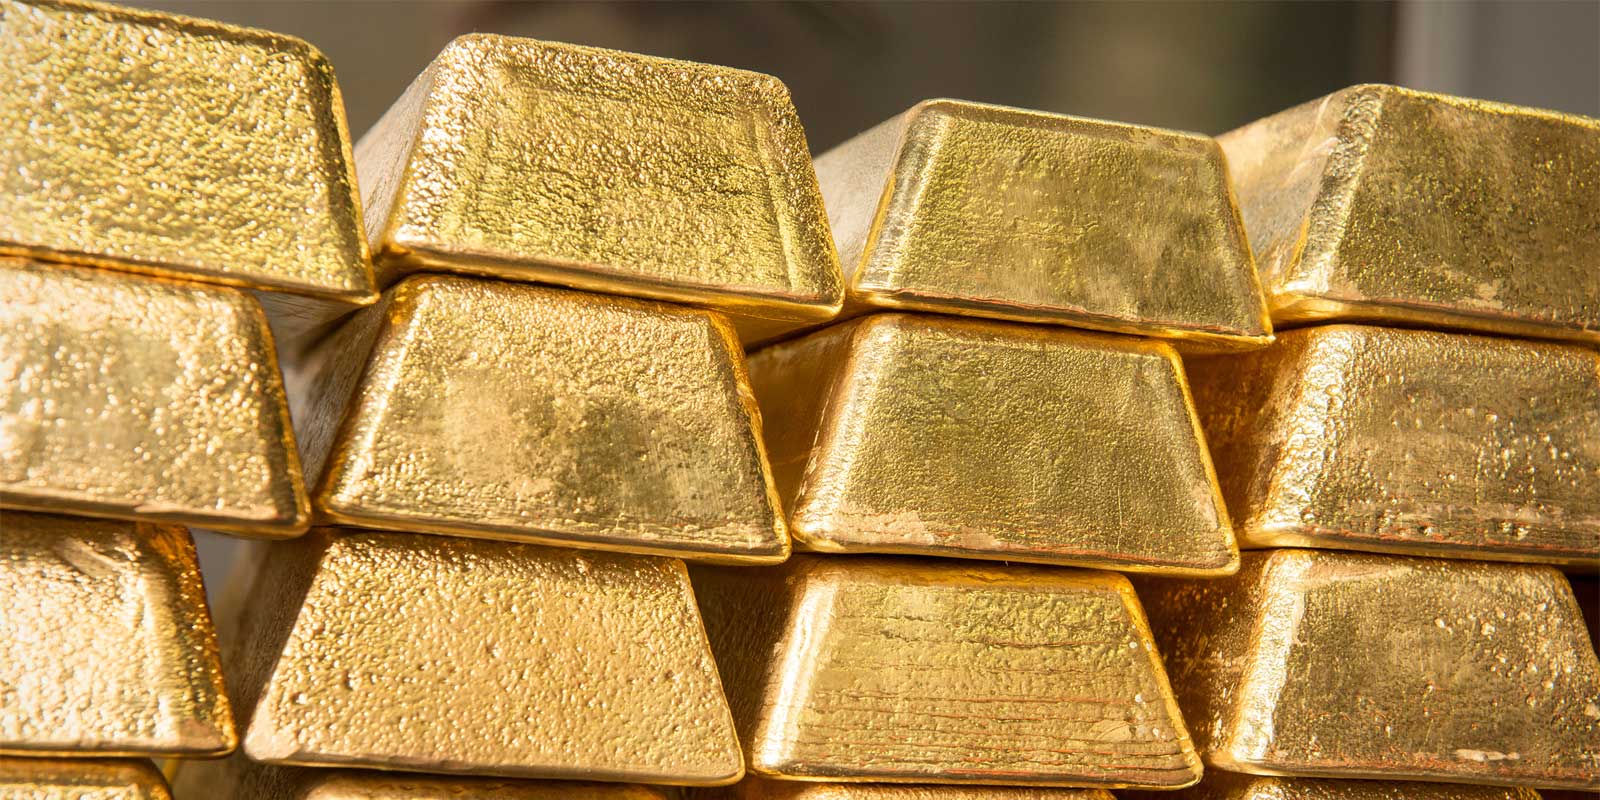 The Royal Mint Taps into Growing Demand for Gold Products Among Muslims